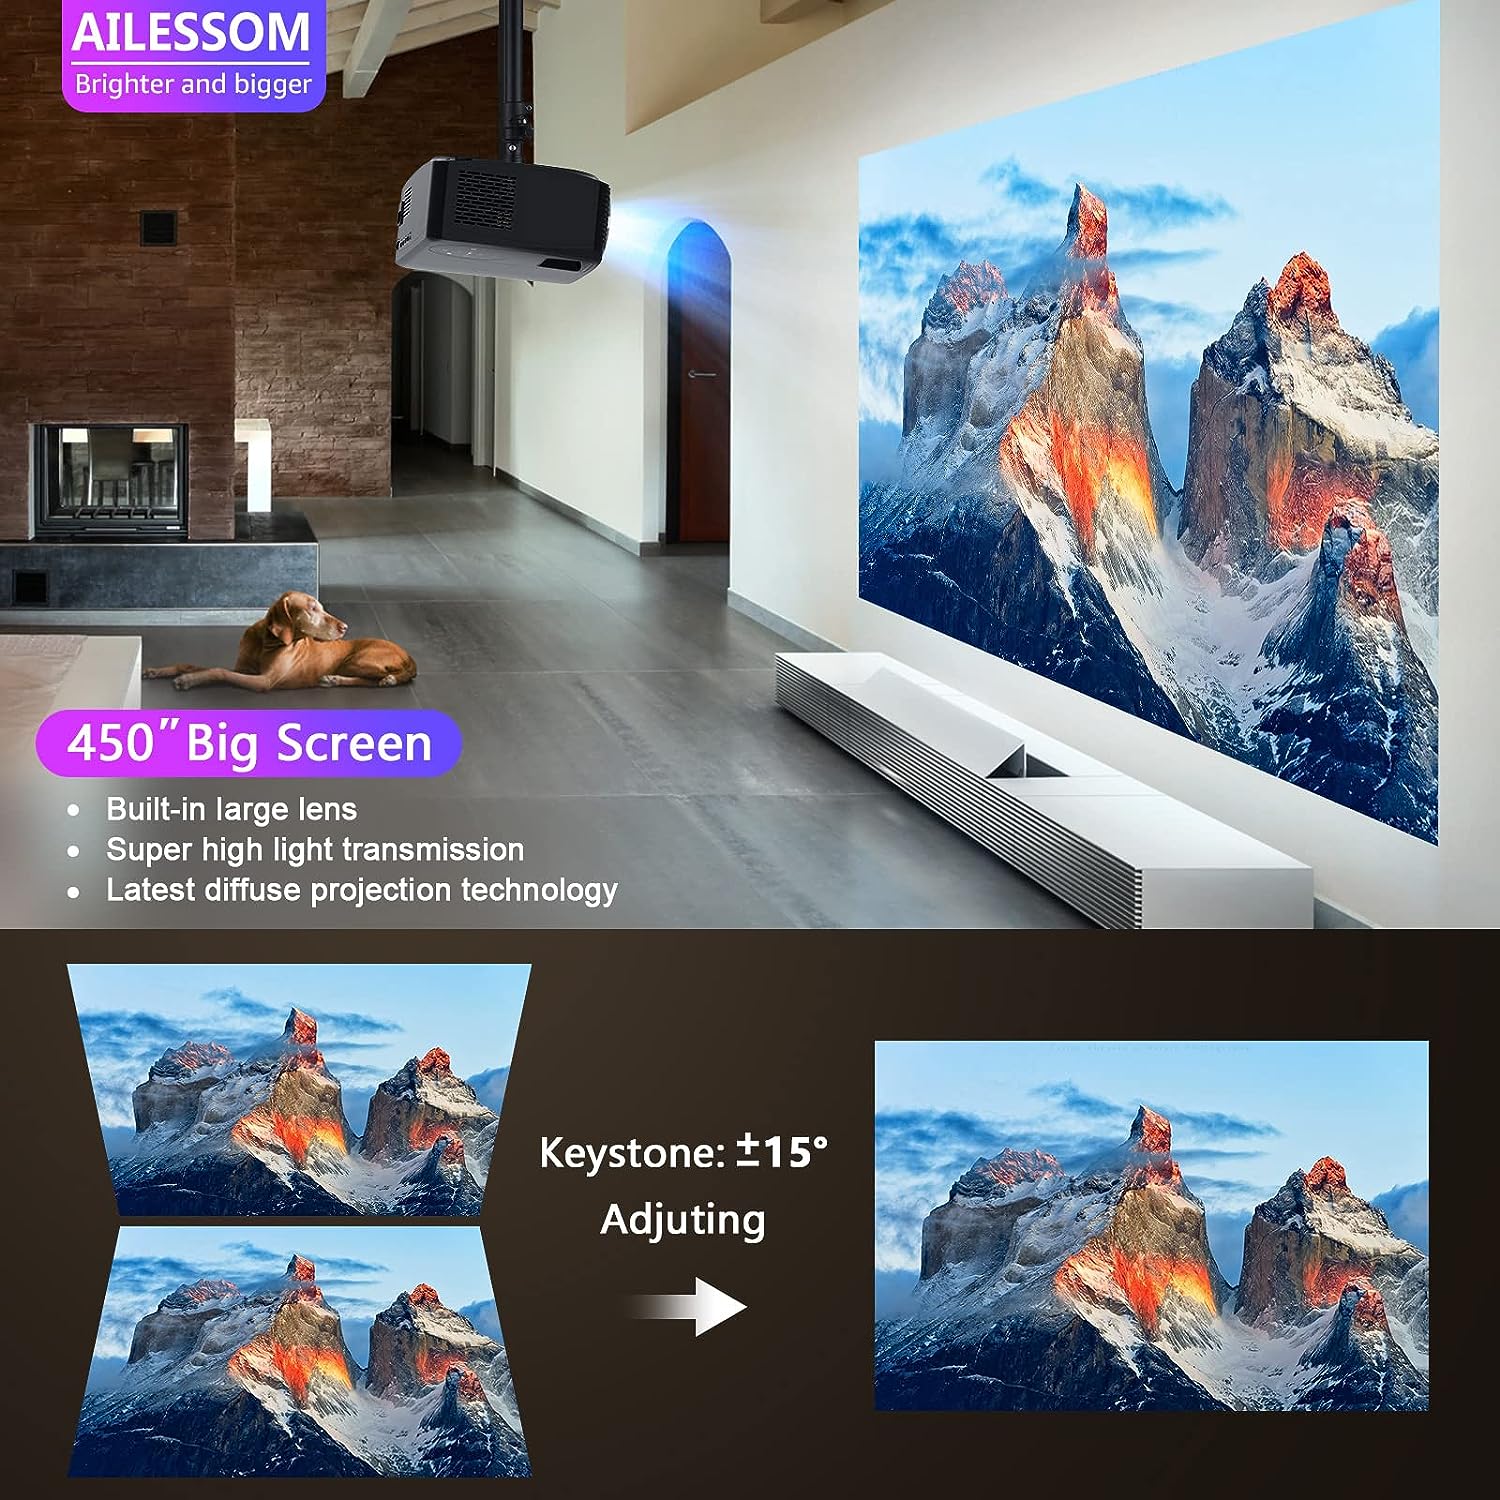 Native 1080P 5G WiFi Bluetooth Projector, AILESSOM 20000LM 450 Display Support 4K Movie Projector, High Brightness for Home Theater and Business, Compatible with iOS/Android/TV Stick/PS4/HDMI/USB/PPT